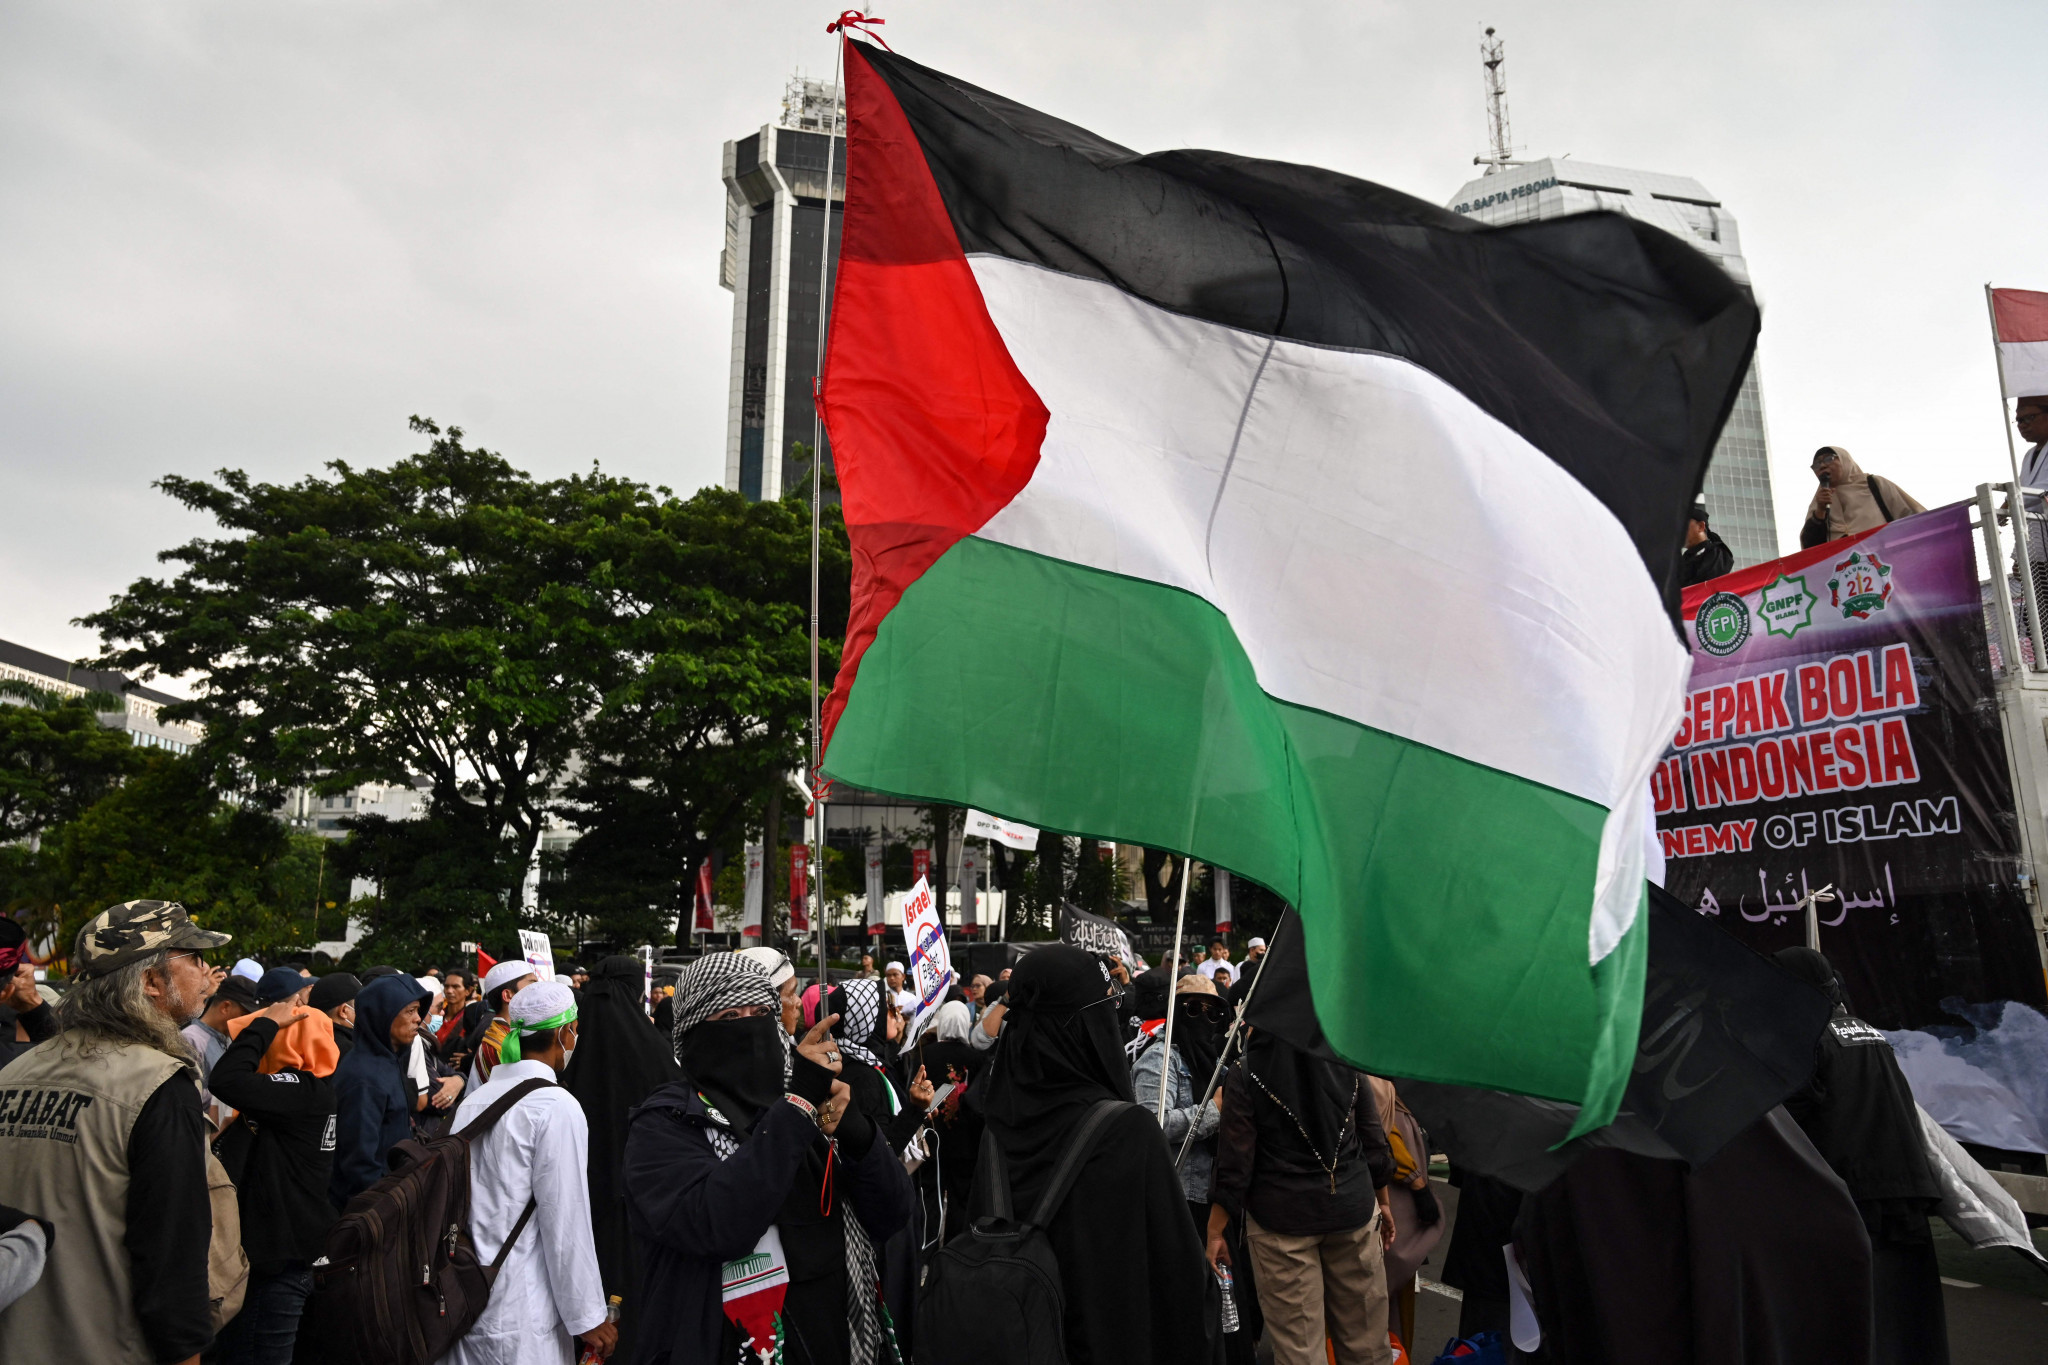 Indonesia is a supporter of the Palestinian cause, and was stripped of the FIFA Under-20 World Cup after opposition to Israel's participation ©Getty Images